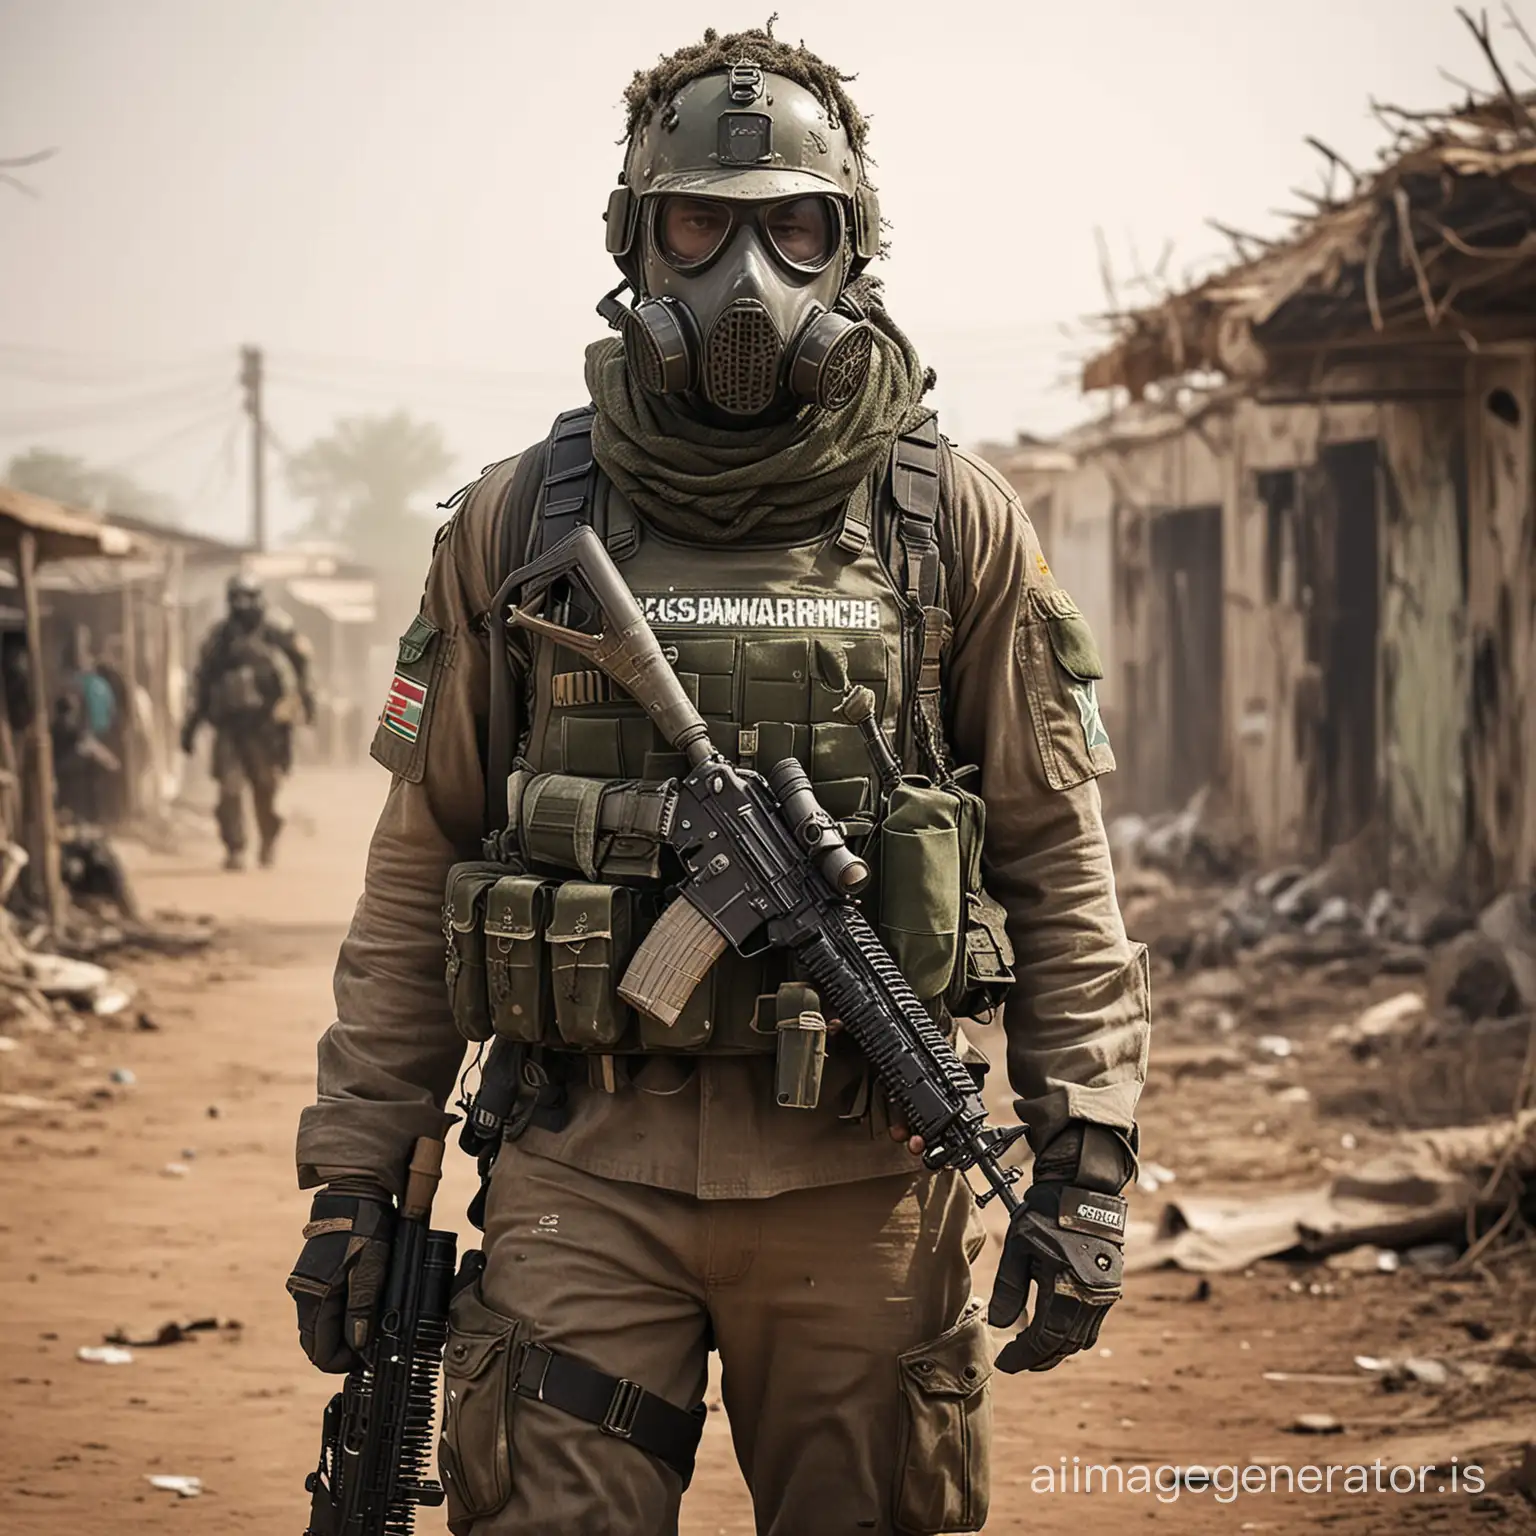 Military operator in a post-apocalyptic setting wearing modern-day body armor in the colors of the Zimbabwean national flag, helmet and a special gas mask and carrying a backpack, with a tattered ghillie suit over his clothes and carrying a rifle. He has the words "Zimboy" painted on his chest.
In a town that has toxic gas
